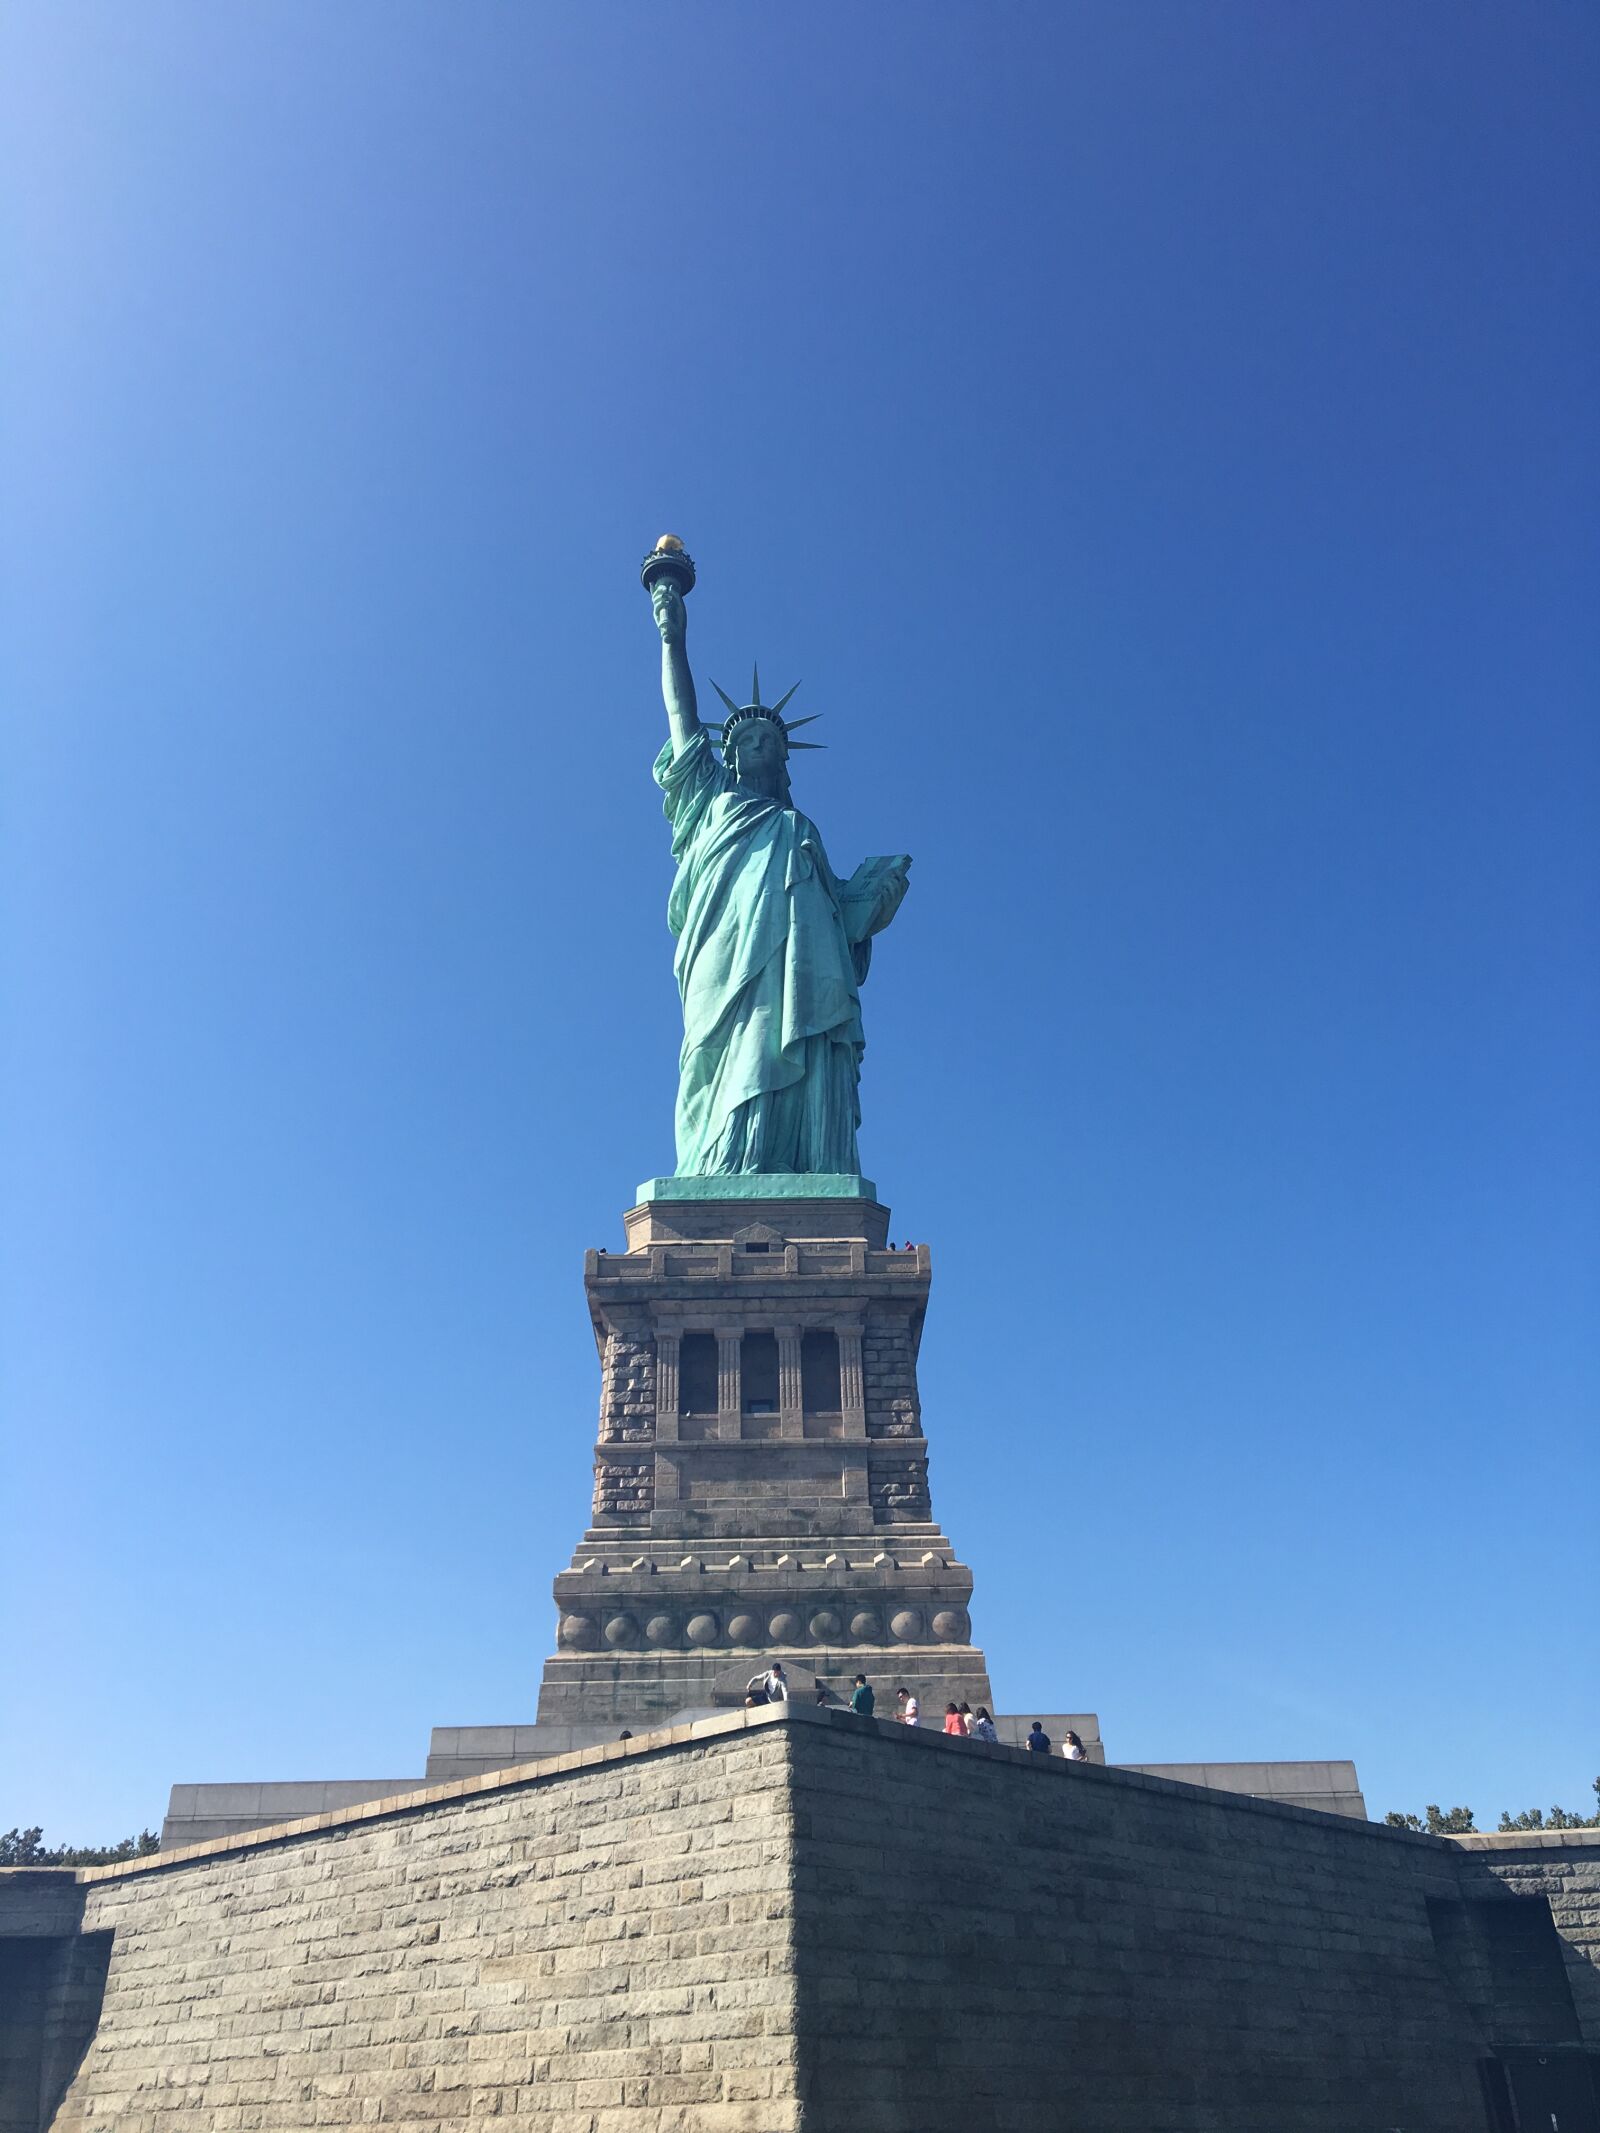 Apple iPhone 6s sample photo. Statue of liberty, new photography